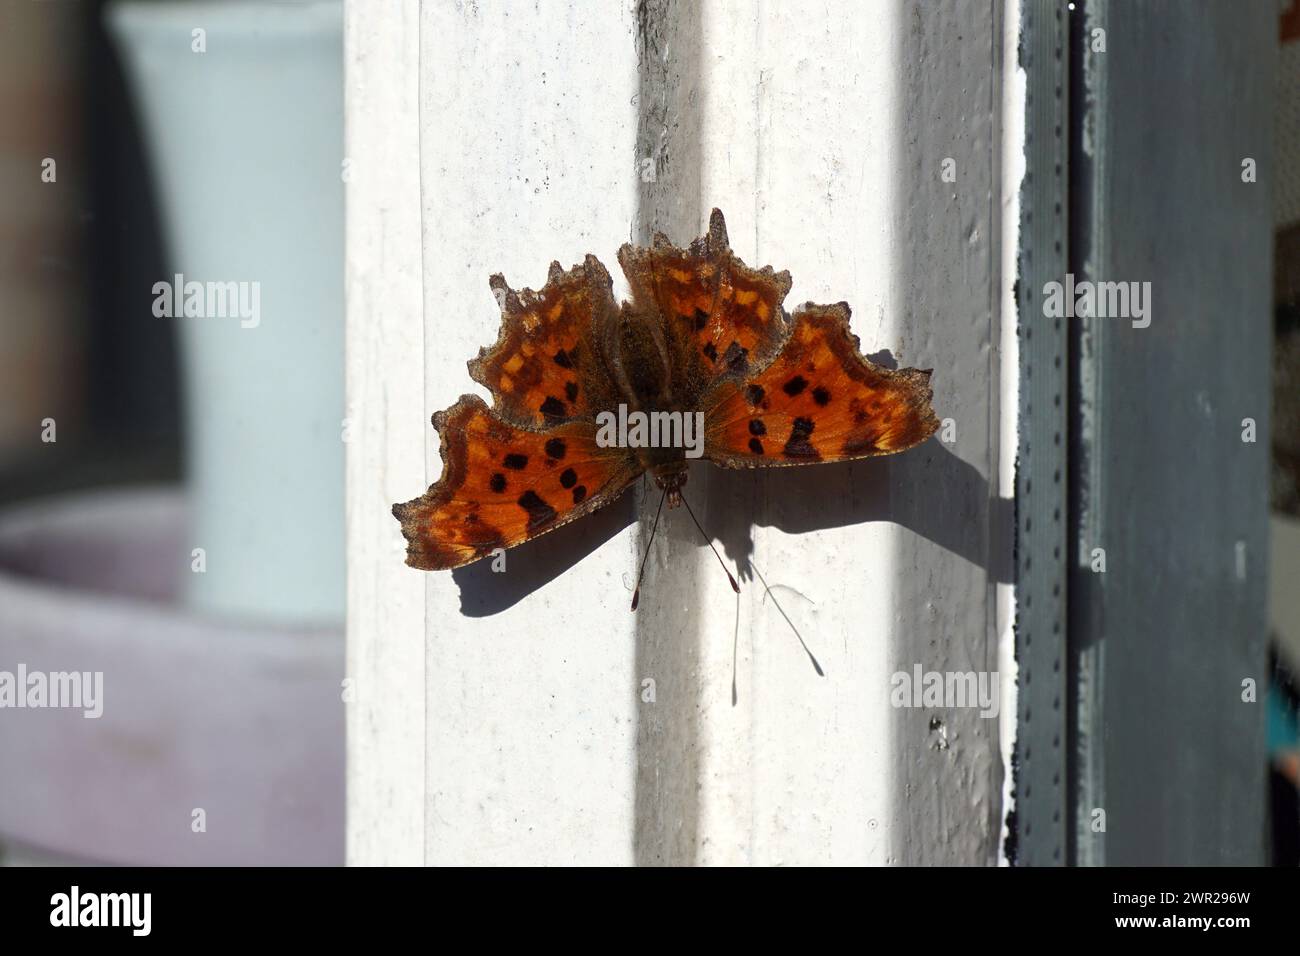 Comma (Polygonia c album), family Nymphalidae. Just woke up from hibernation. Sunbathing on a window frame in spring. March, Netherlands Stock Photo